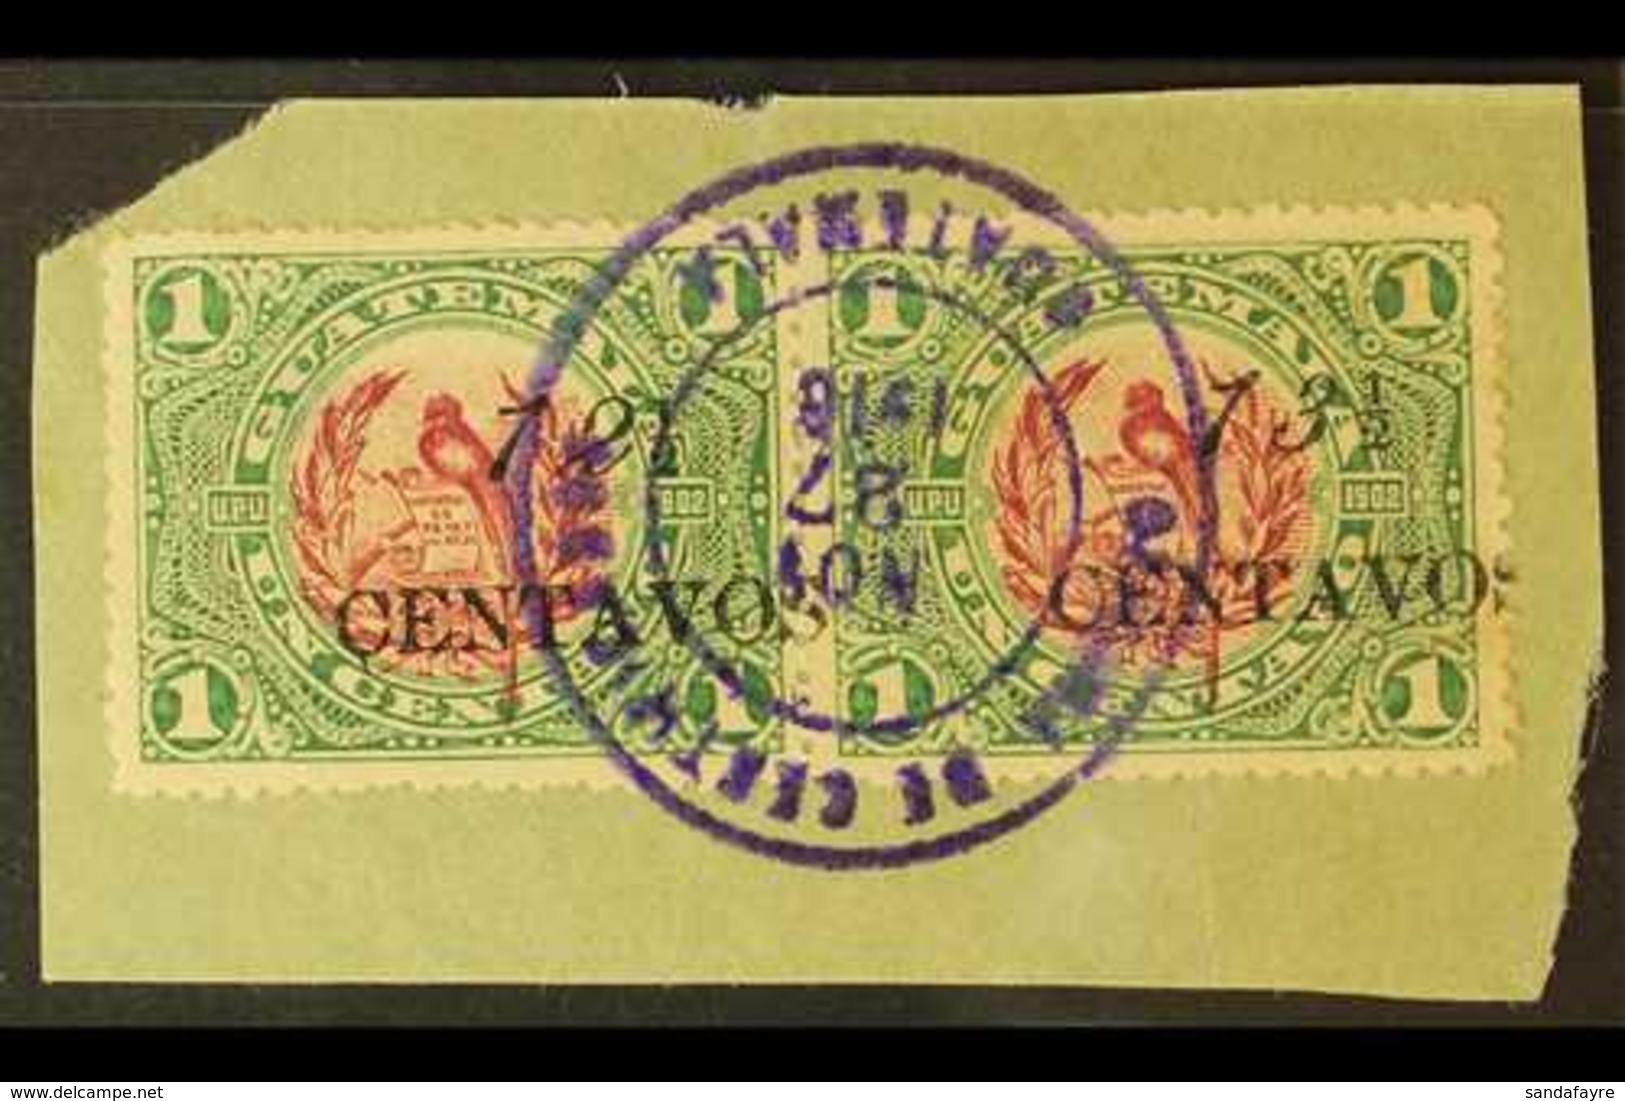 1916 12½ On 1c Claret & Green "13½" FOR "12½" Variety In Horizontal SE-TENANT PAIR With Normal Stamp, SG 153+153d, Very  - Guatemala